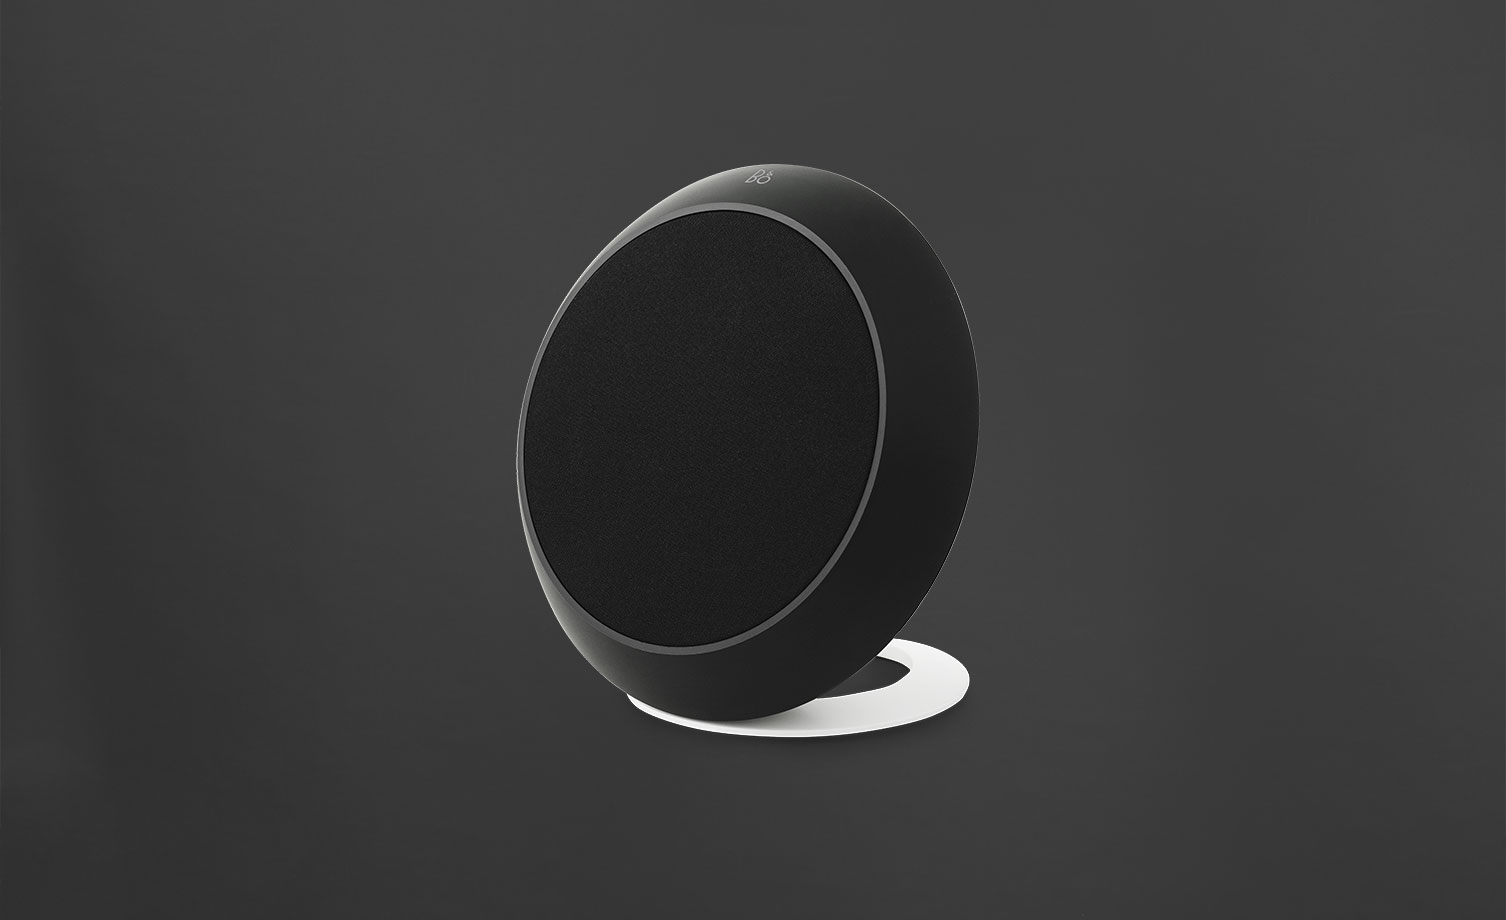 Bang & Olufsen BeoPlay S8 entry-level wireless speakers1506 x 920